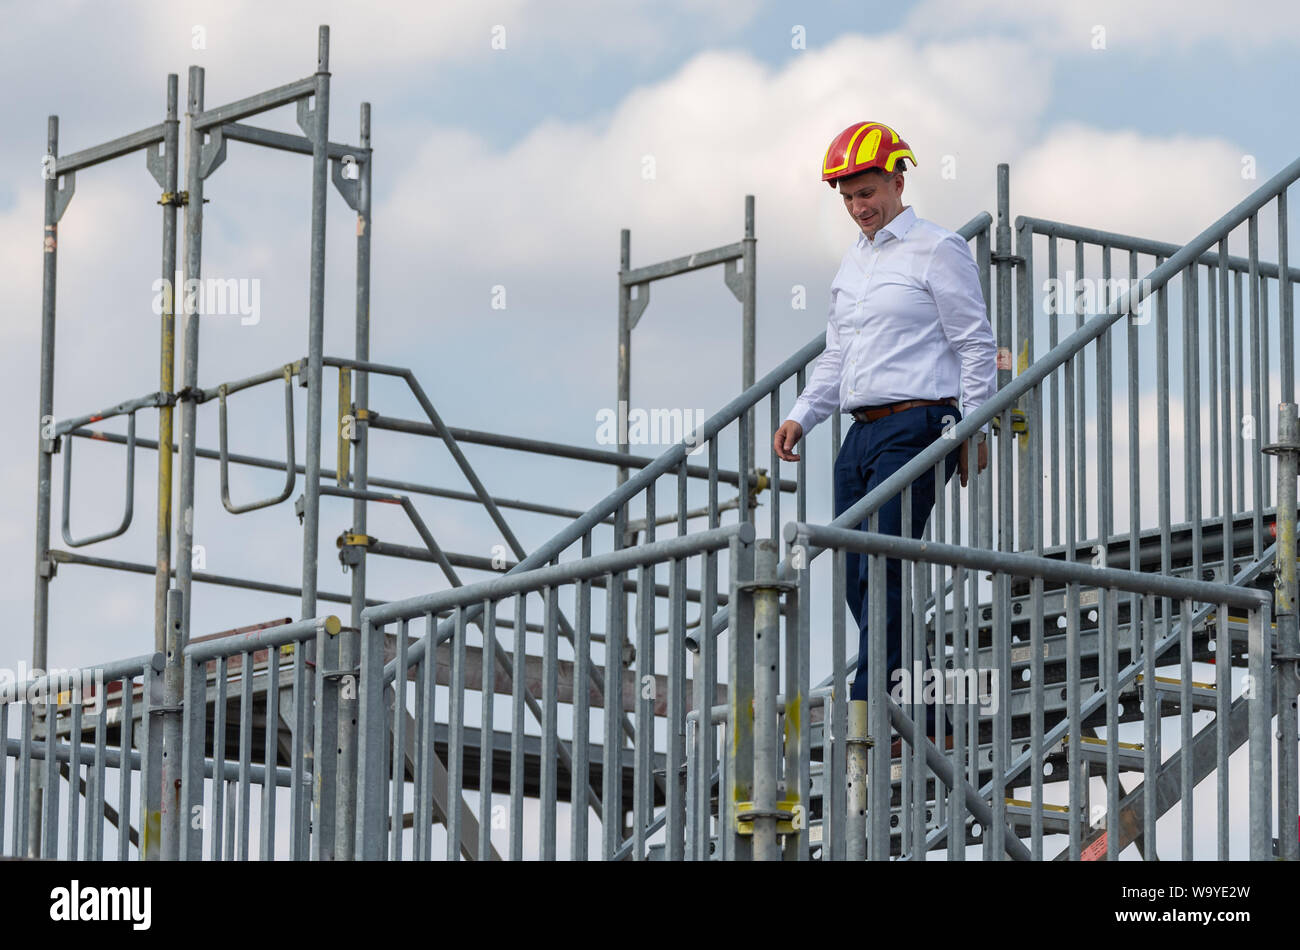 18 July 2019, Saxony, Roßwein: Martin Dulig (SPD), Minister of Economic Affairs of Saxony, is about to start reading the 'Mutmacher' book on a scaffold on the premises of Gemeinhardt Gerüstbau Service GmbH. Photo: Robert Michael/dpa-Zentralbild/ZB Stock Photo